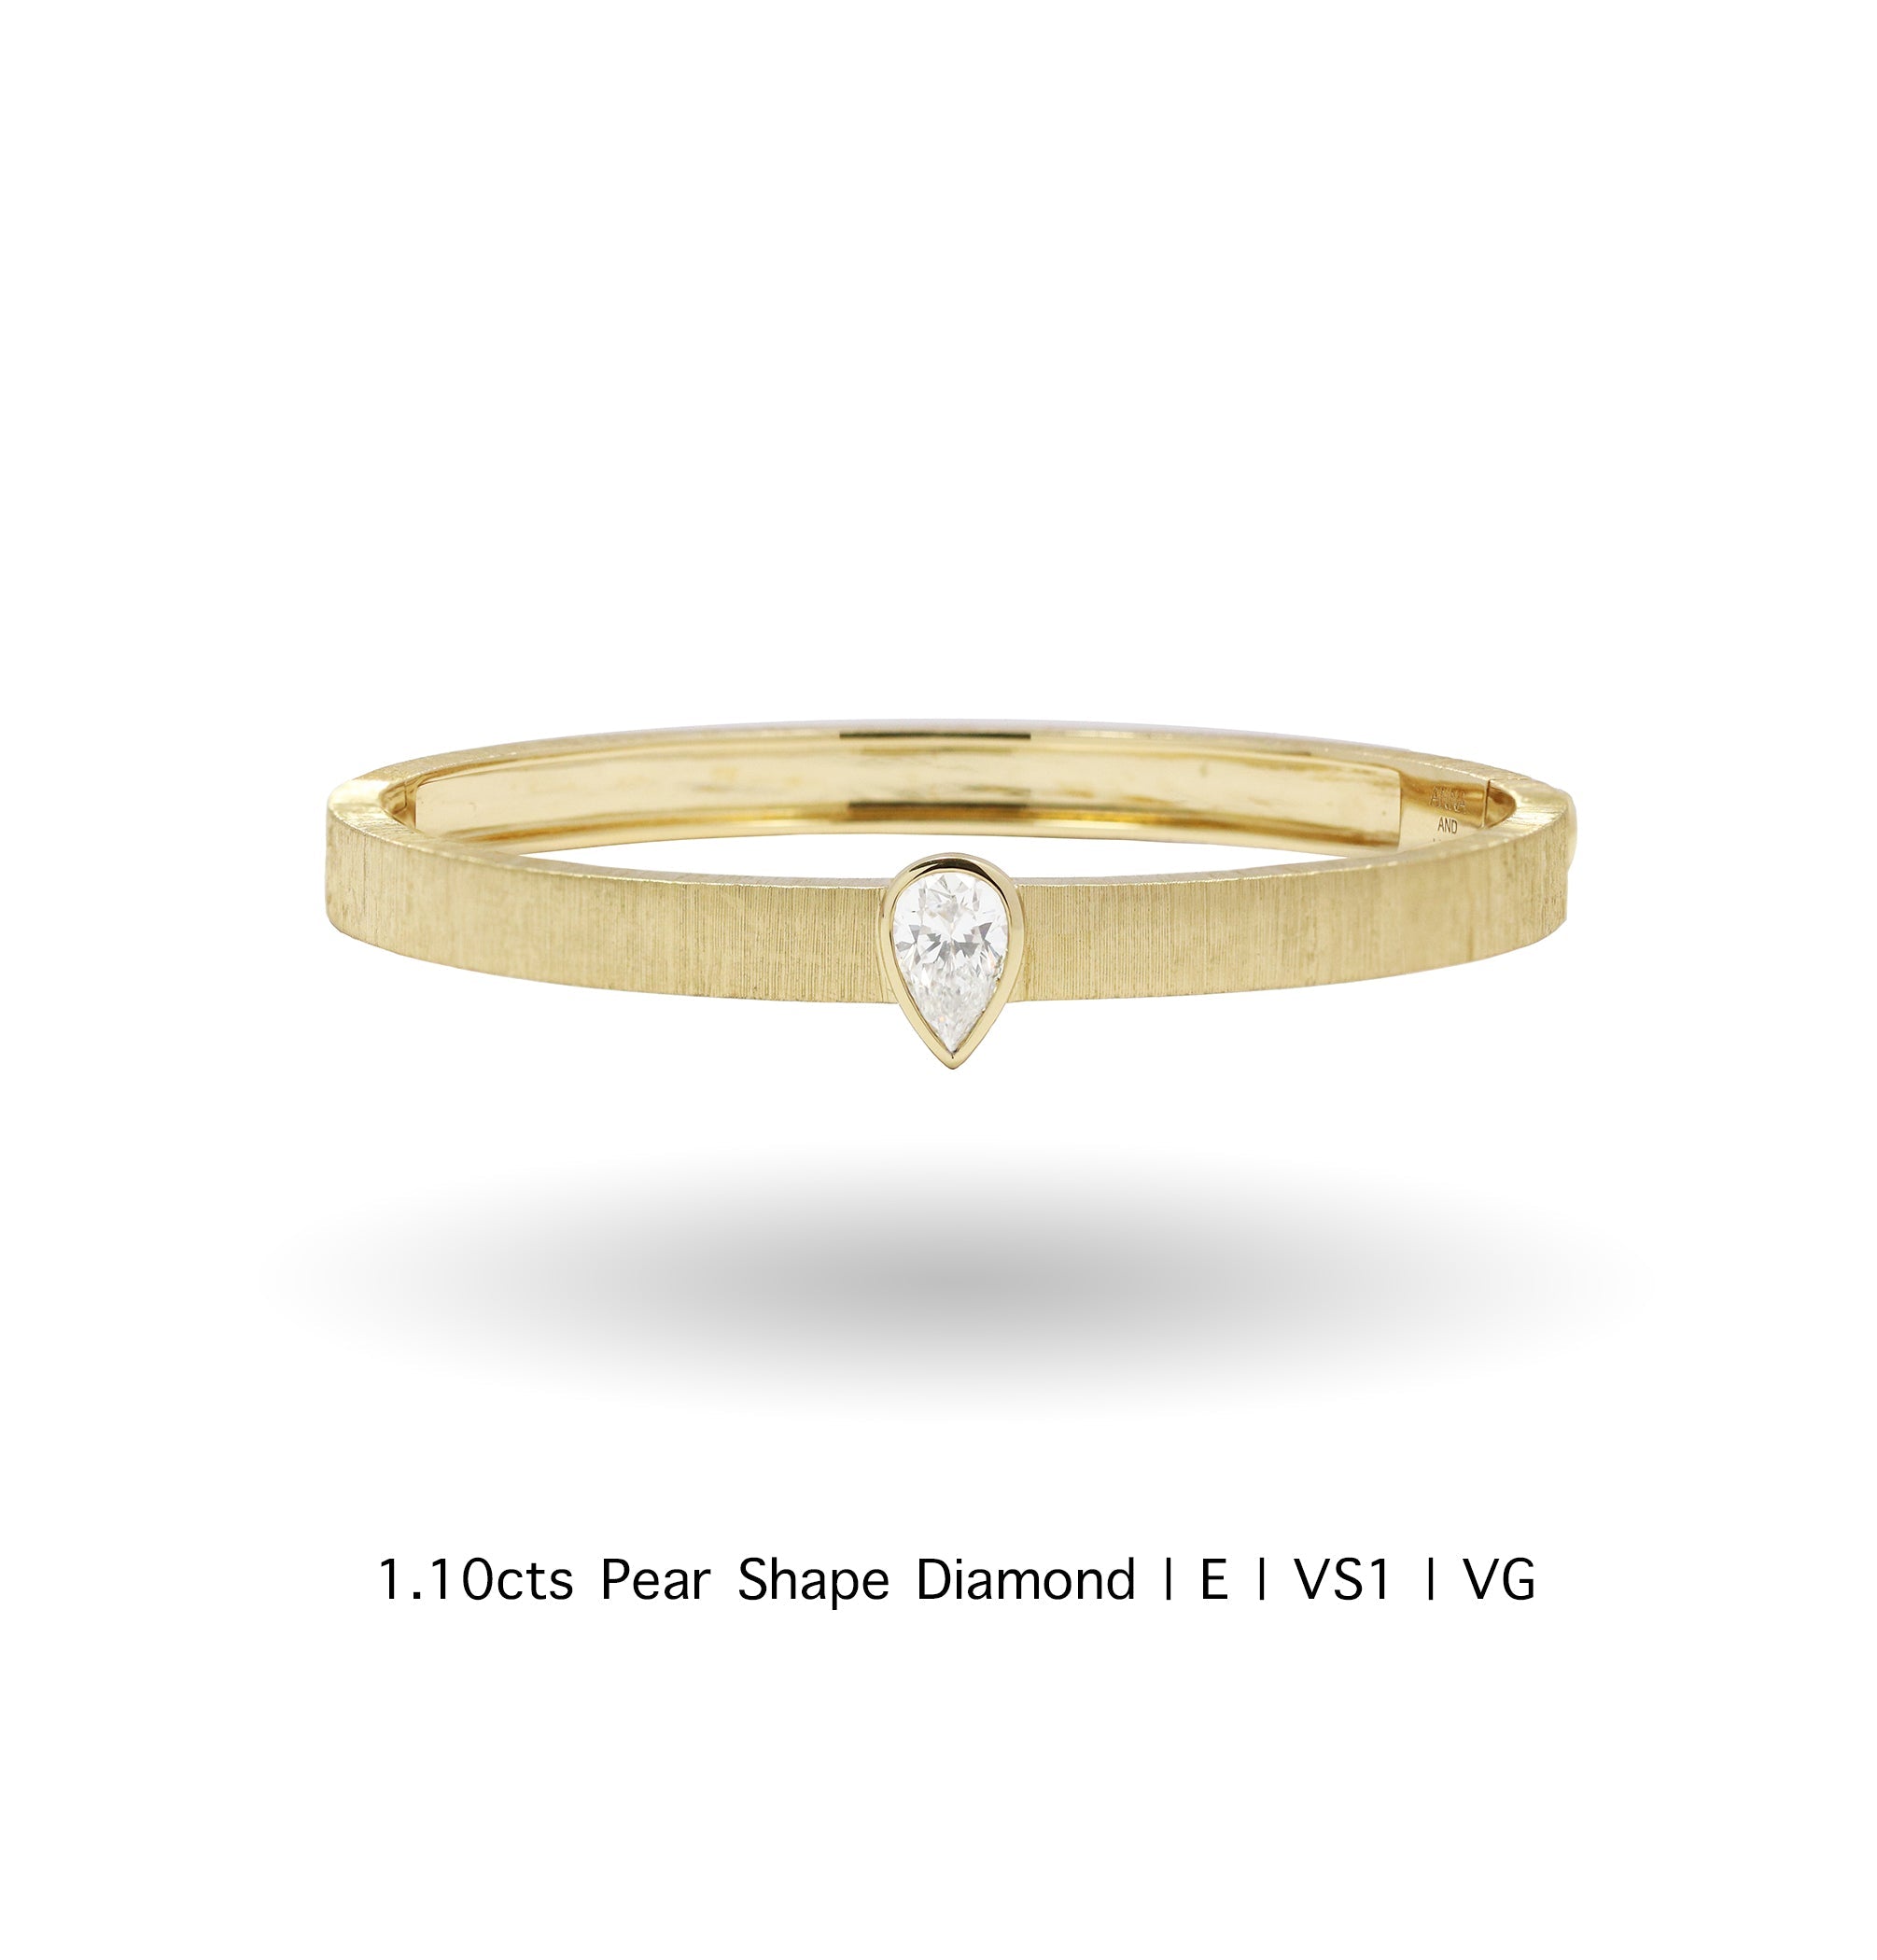 Bespoke GIA Solitaire Diamond Engraved Bangle in Yellow Gold